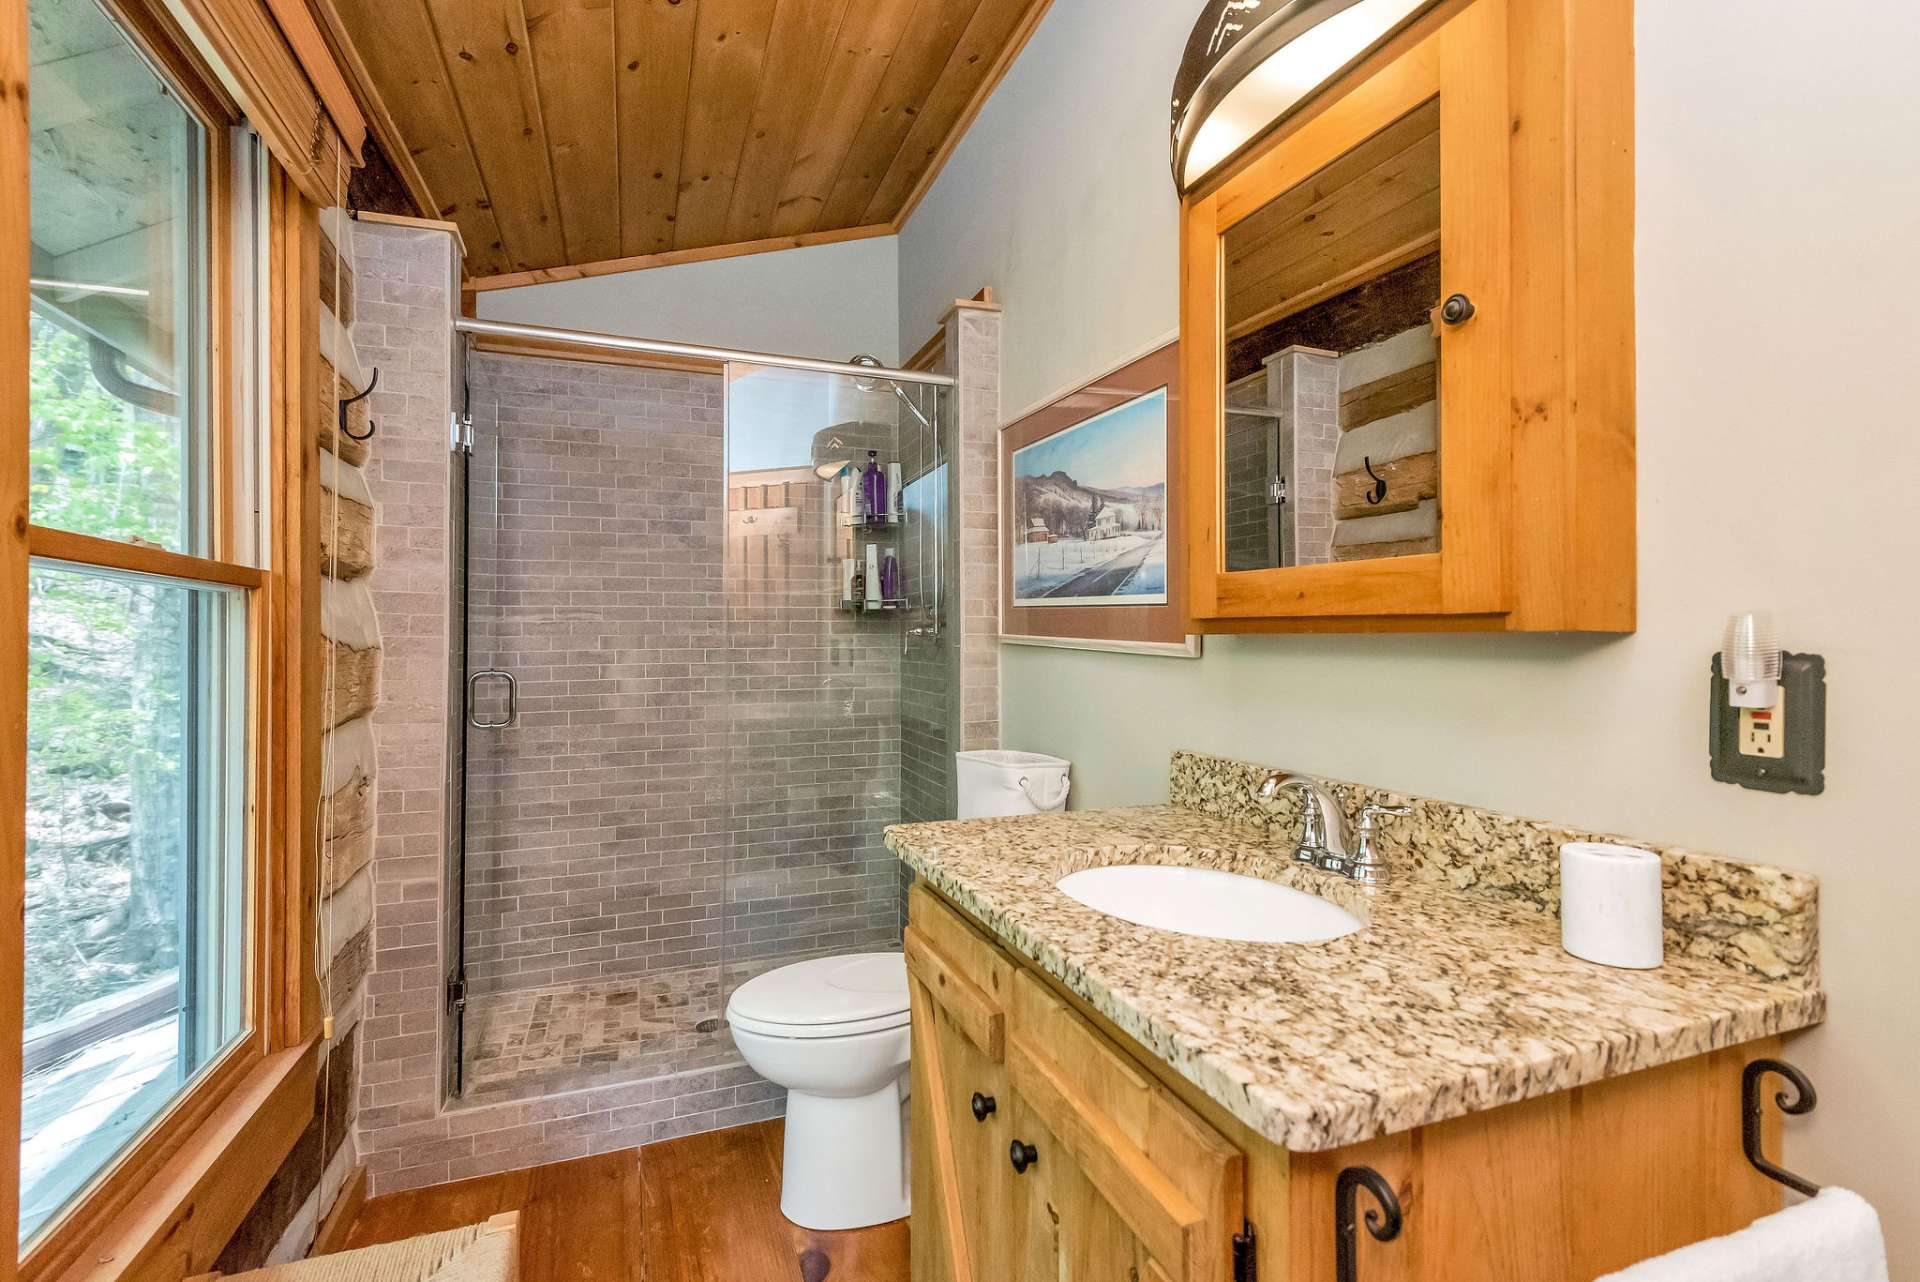 Upper level bath also features granite counter tops and a walk-in shower with glass door.